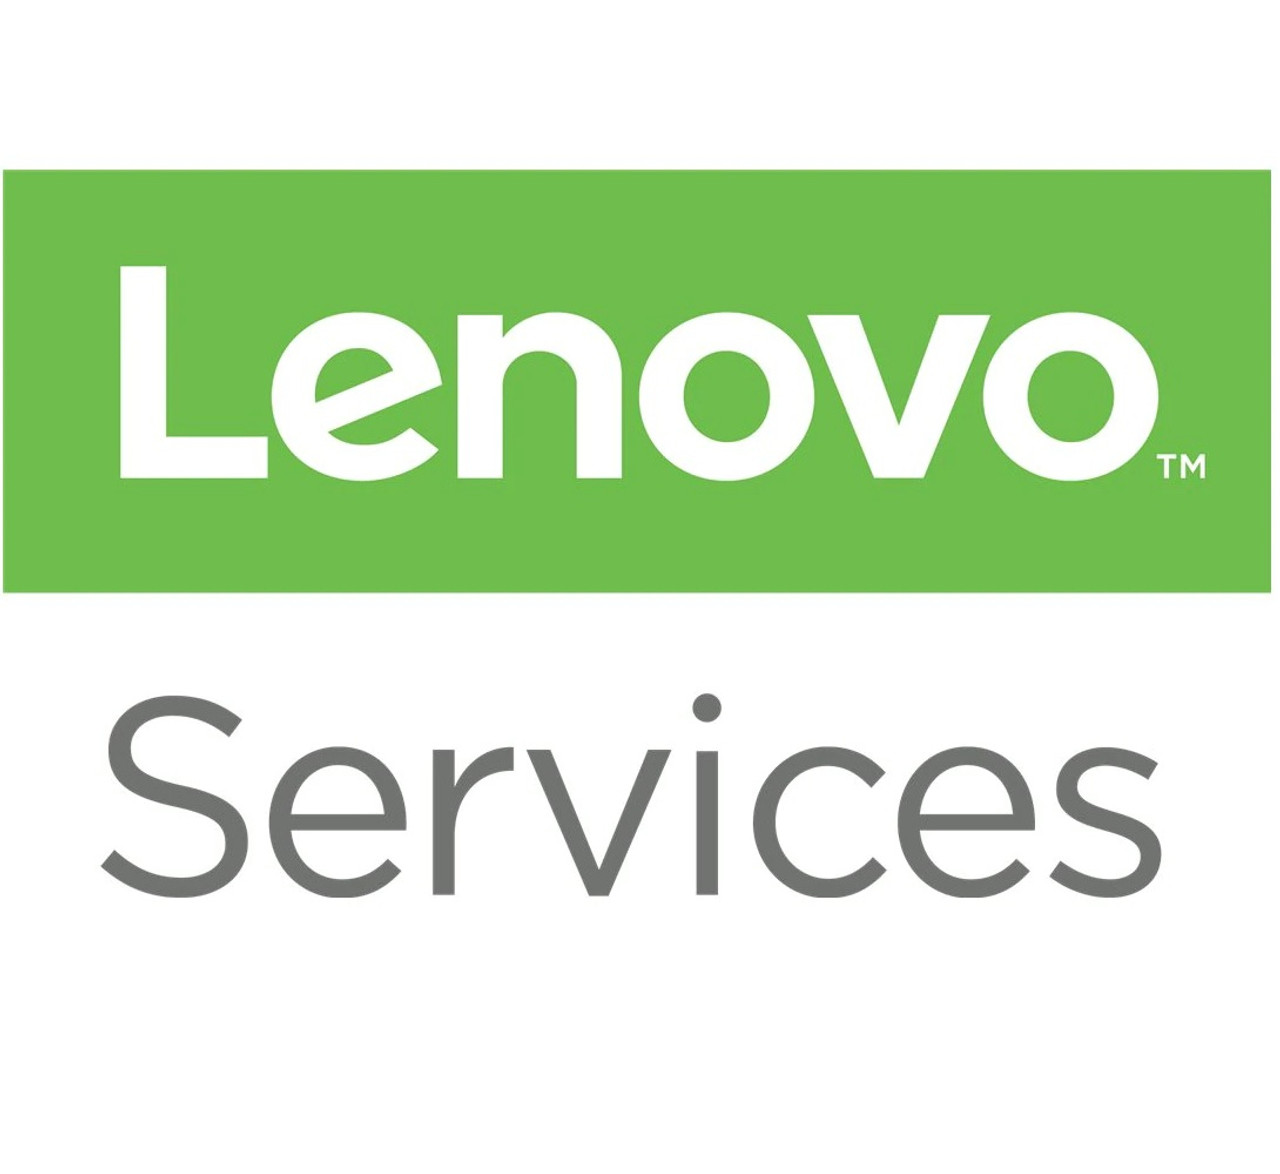 Lenovo International Services Entitlement Add On - Extended service agreement - zone coverage extension - 1 year - for ThinkPad P1, P1 (2nd Gen), P16 Gen 2, P40 Yoga, P43, P50, P51, P52, P53, P71, P72, P73